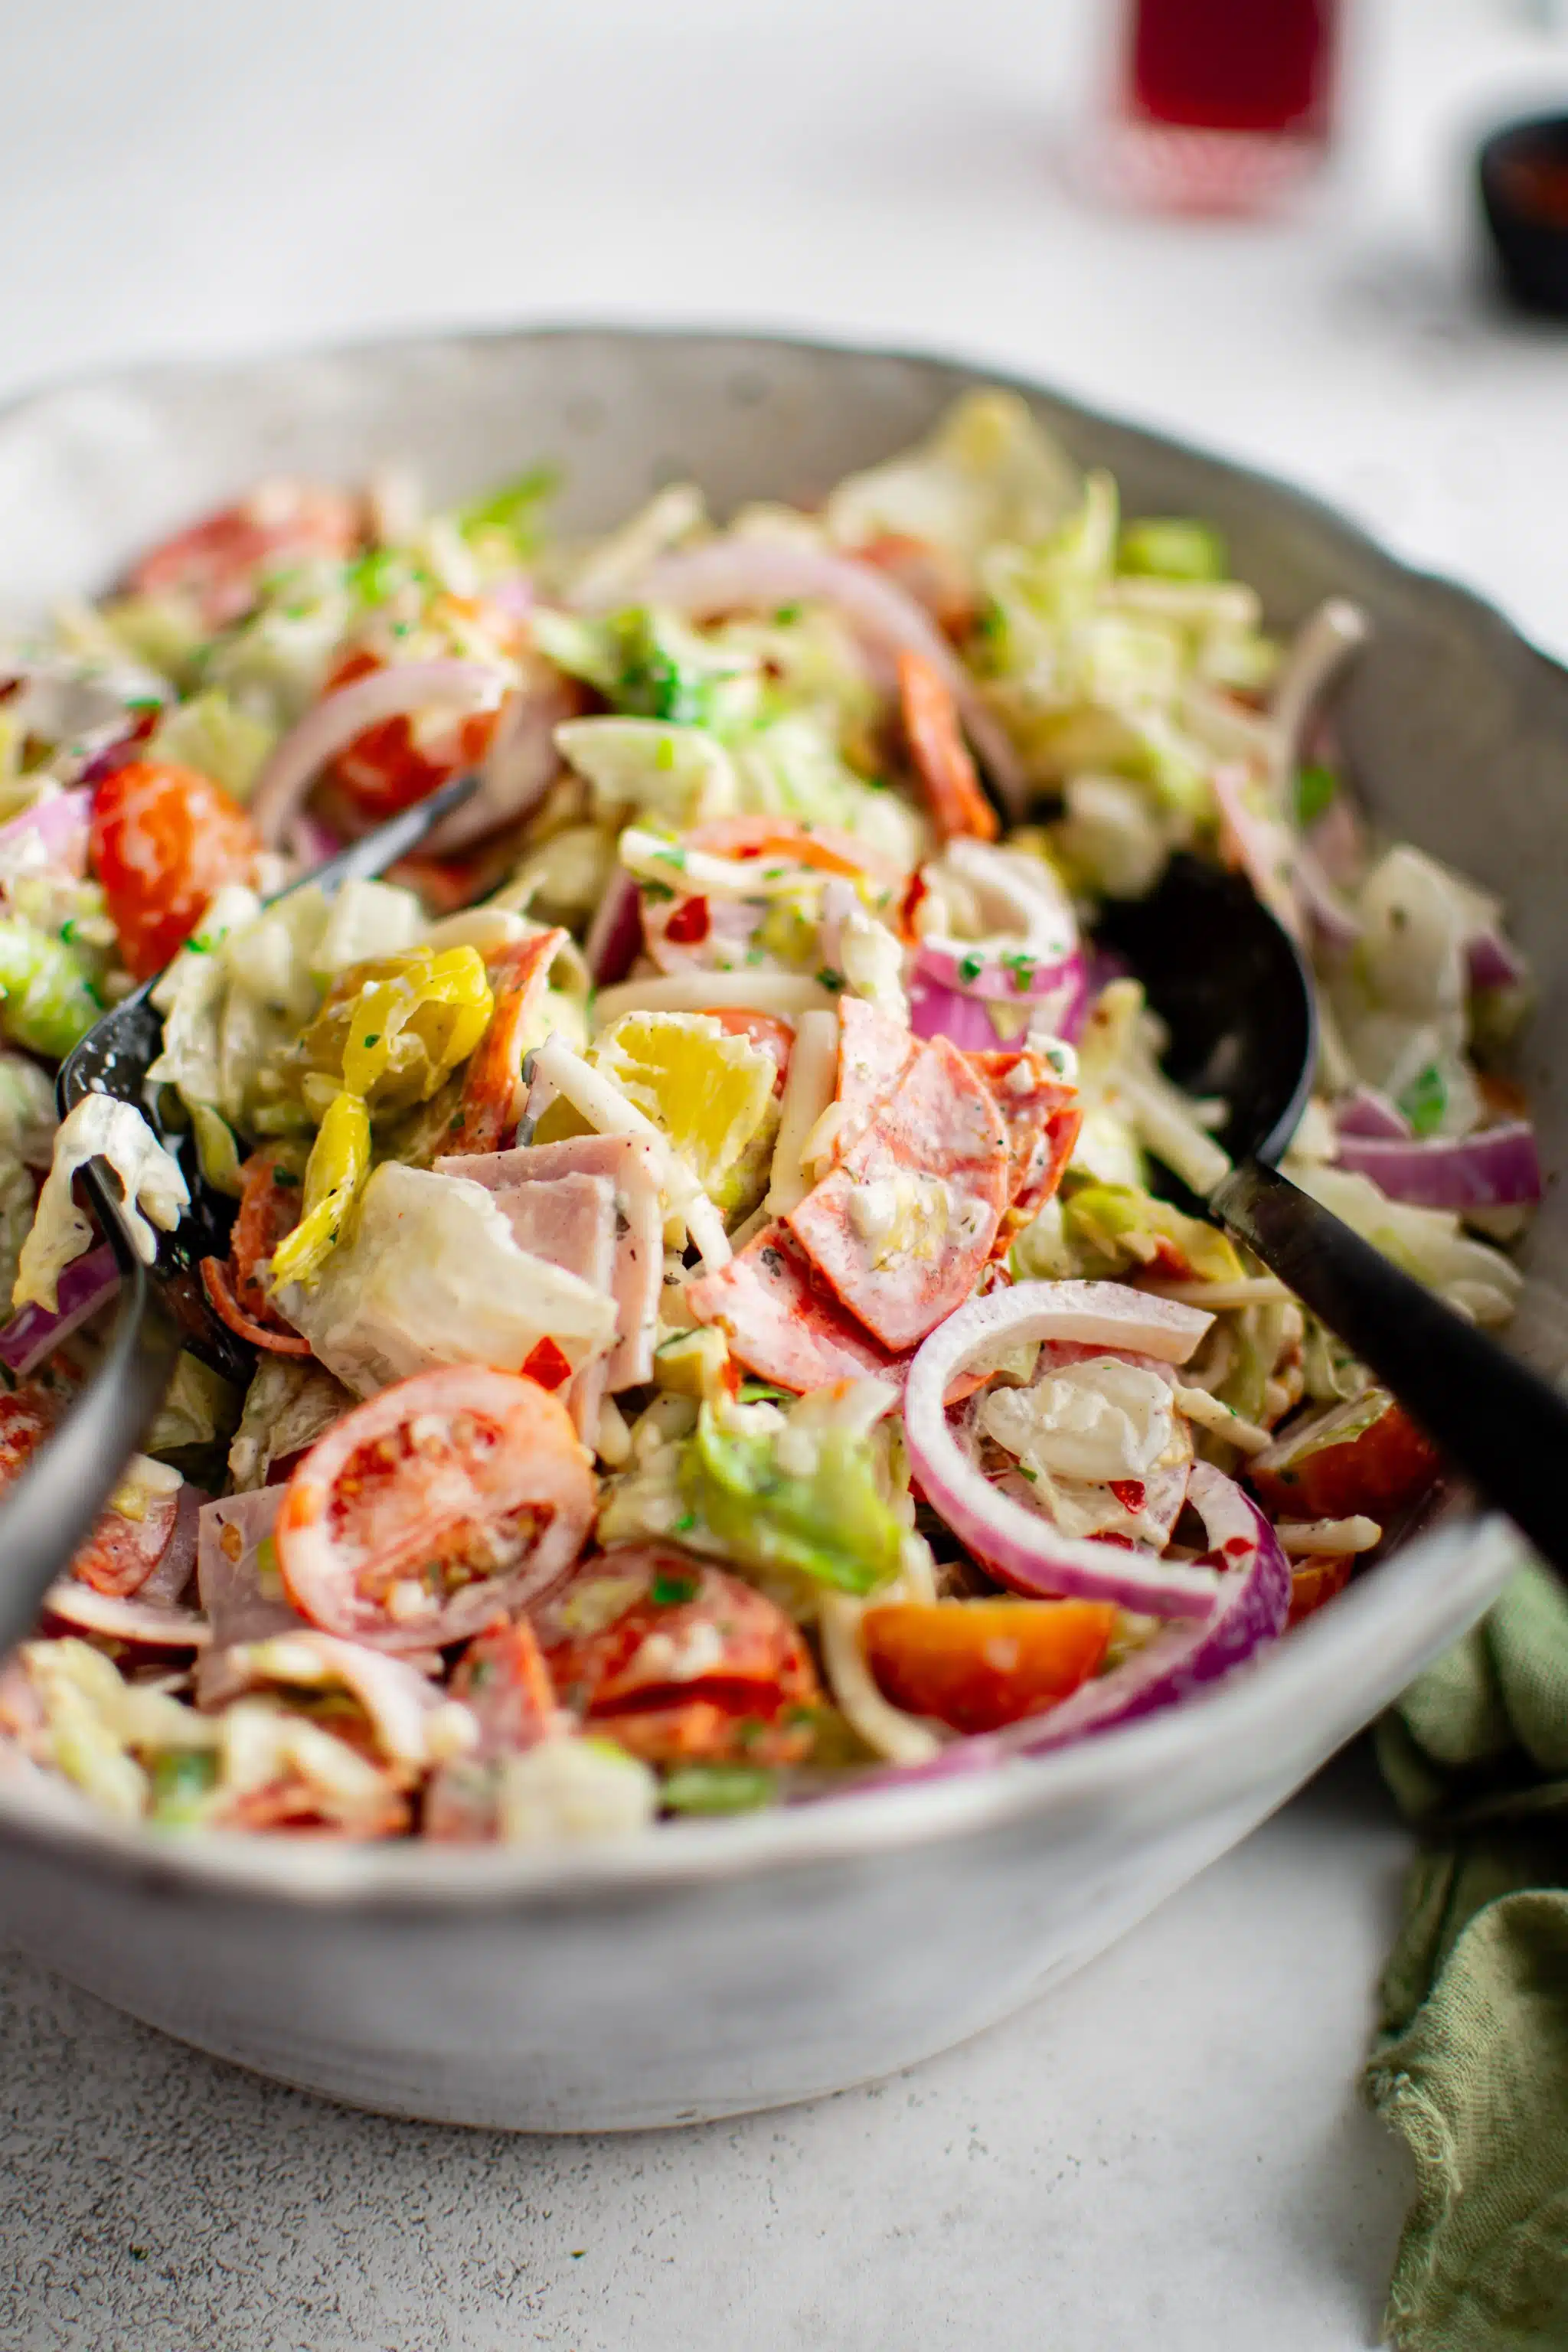 Grinder salad presented in a large white ceramic salad bowl filled with chopped iceberg lettuce, halved cherry tomatoes, sliced red onion, sliced pepperoncini peppers, and sliced ham, pepperoni, and salami.